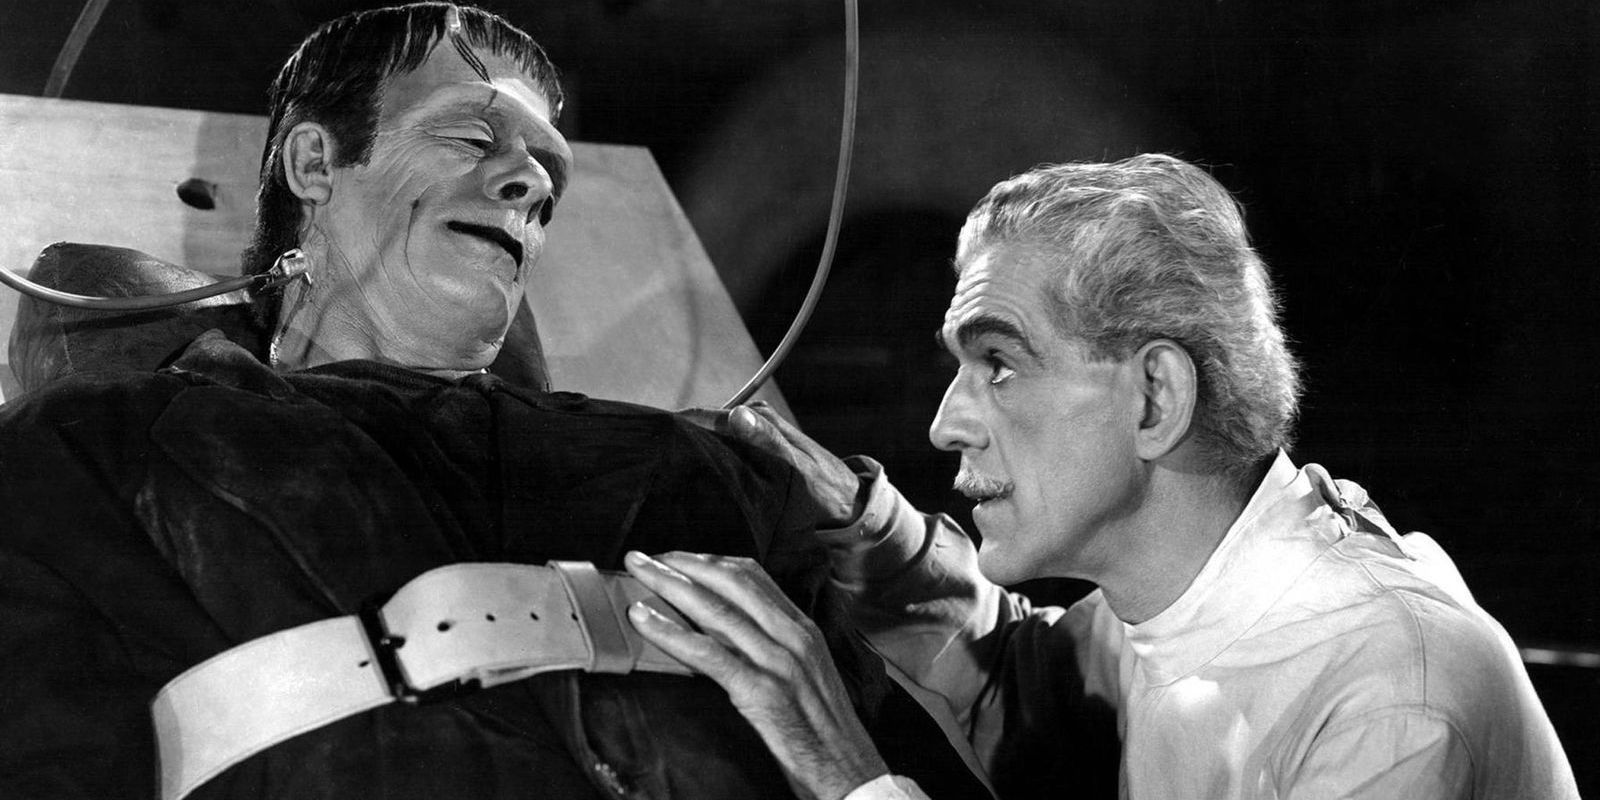 Frankenstein's monster strapped to a bed and being watched by Doctor Frankenstein